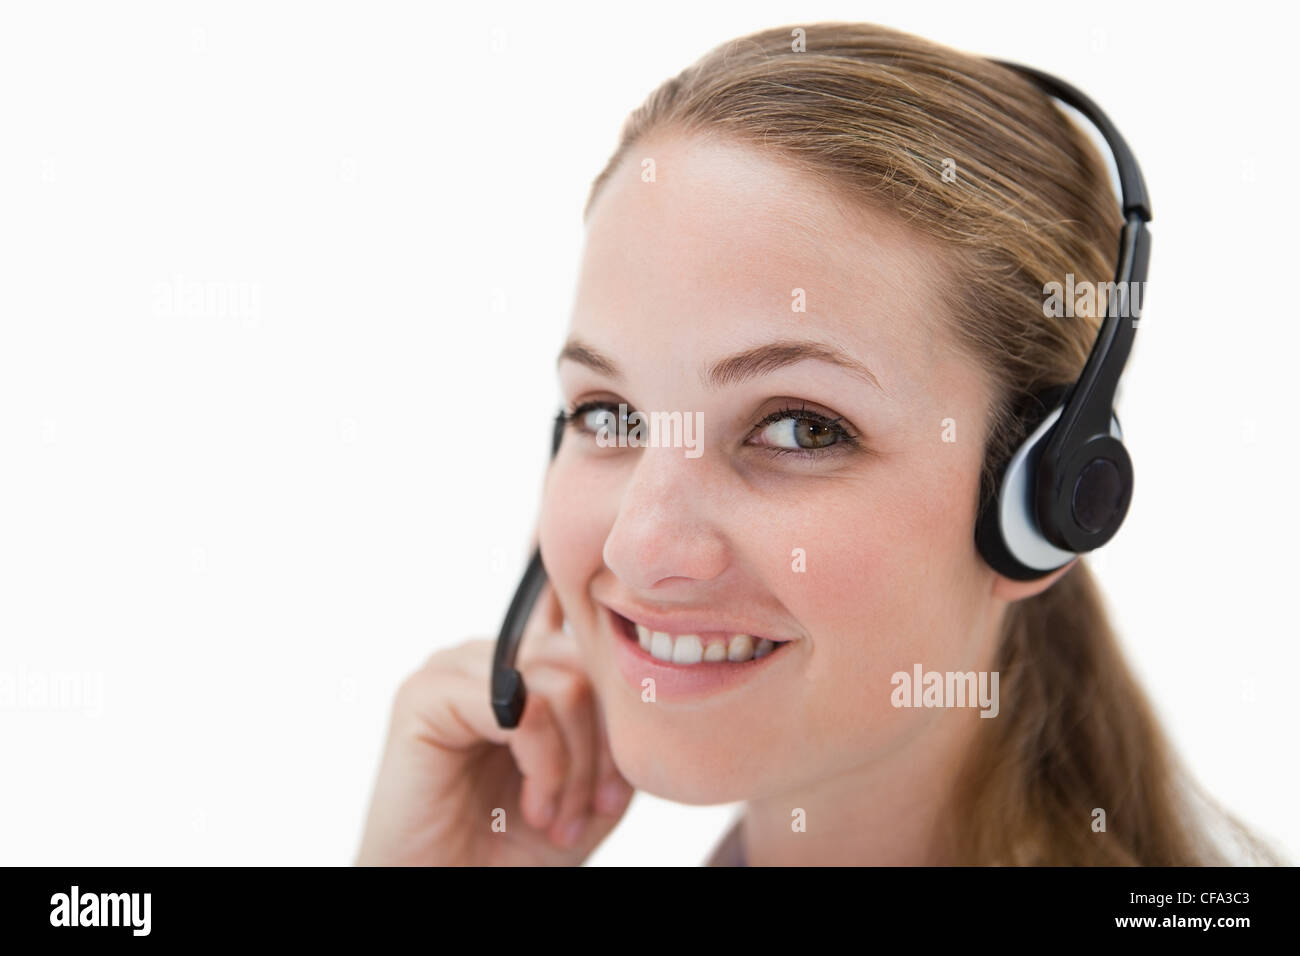 Side view of smiling call center agent with headset Stock Photo